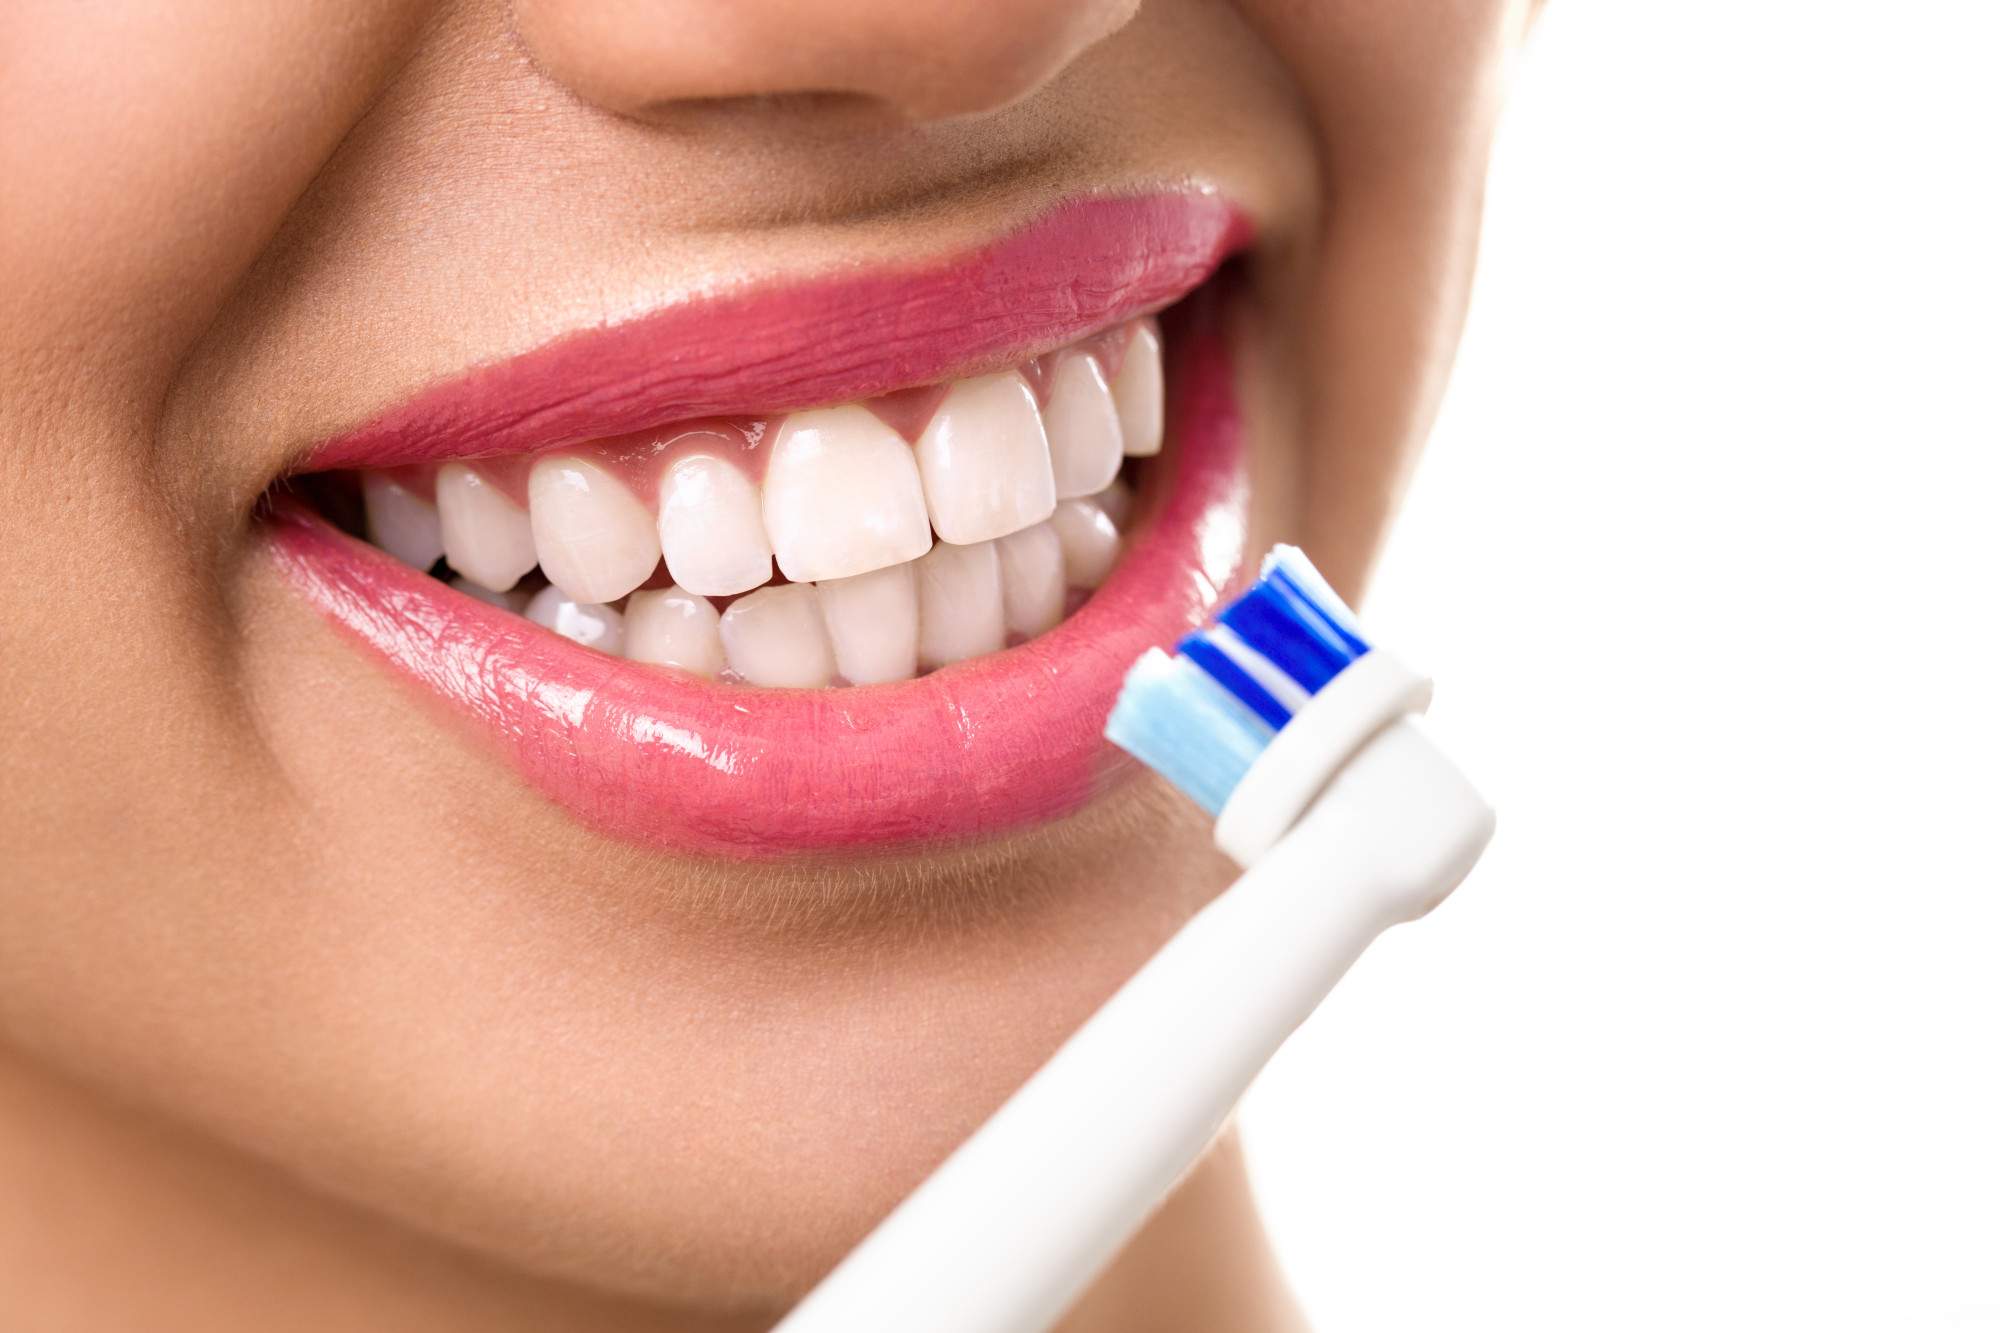 How to Maintain Good Oral Hygiene and Routines